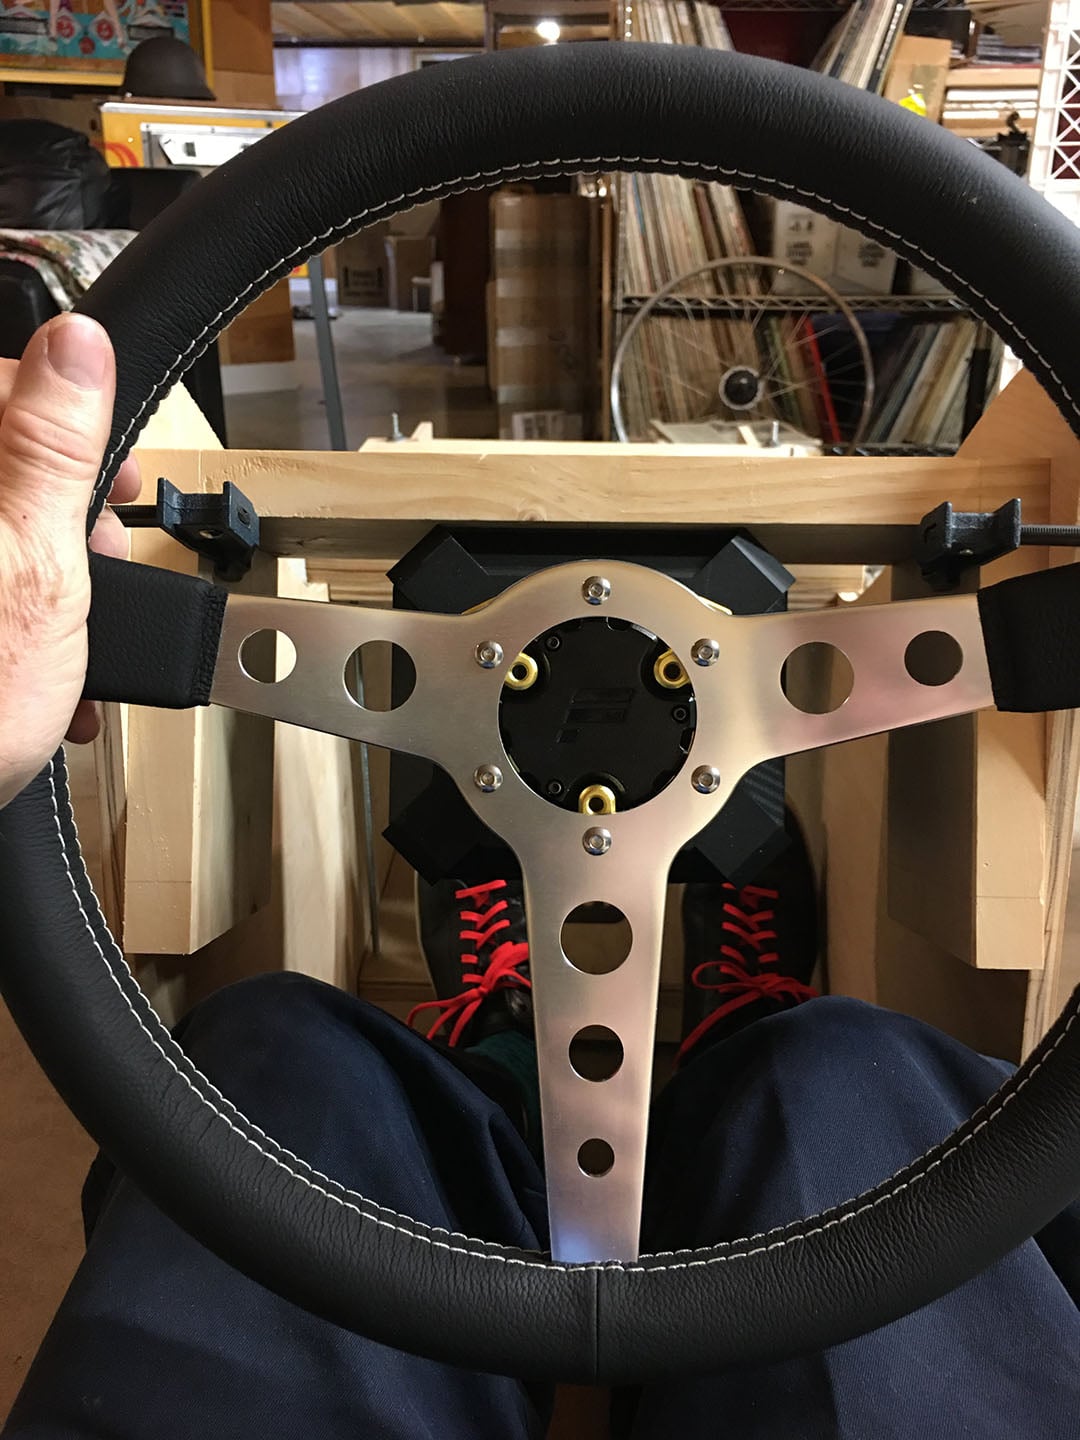 Wheel and pedal view from front